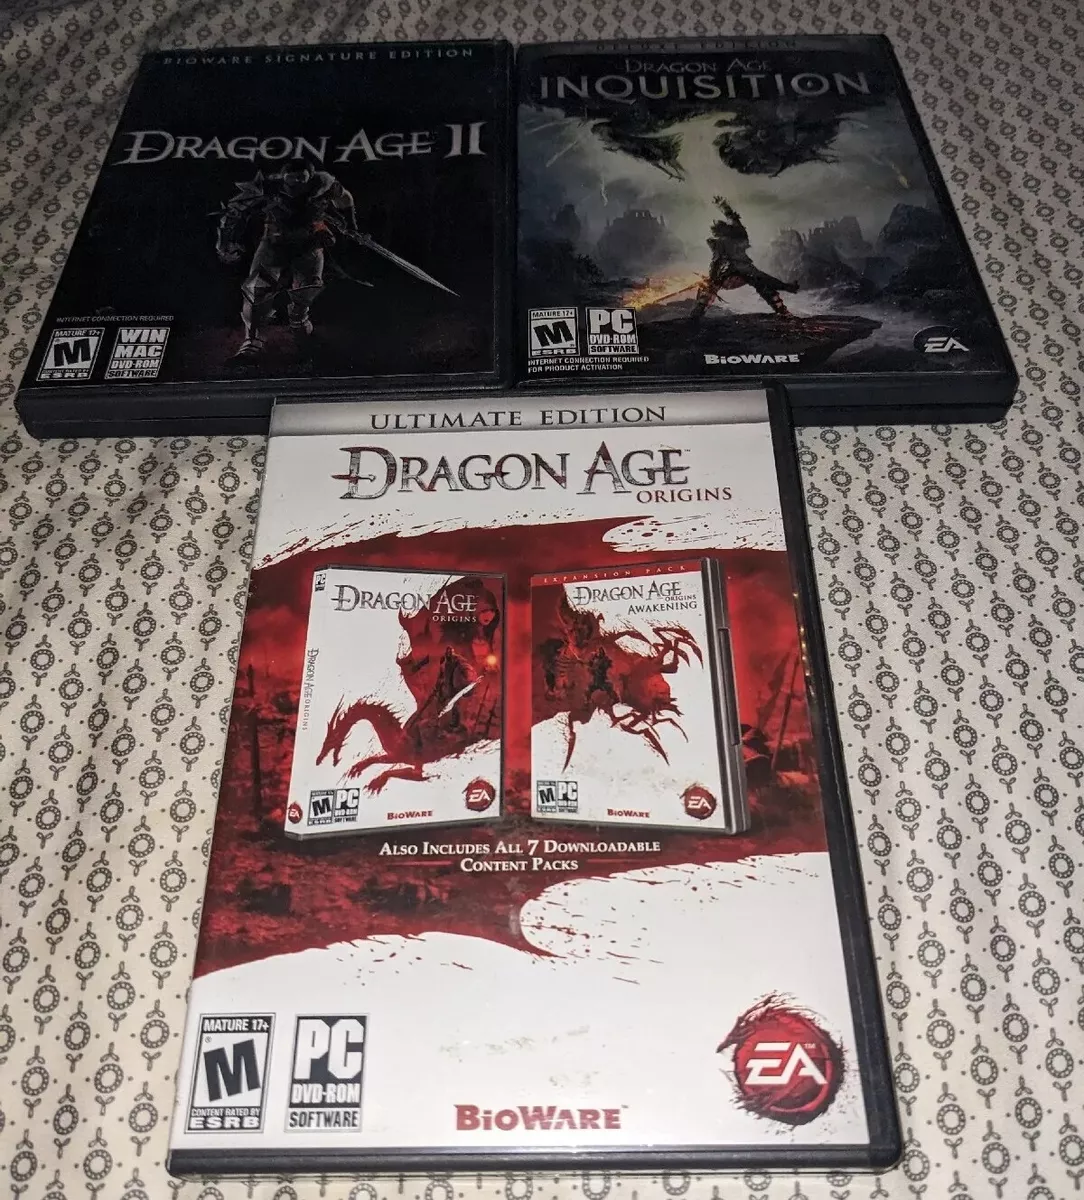 PC Cd-rom Game Lot X3 - Dragon Age: Origins, Inquisition, And Dragon Age II